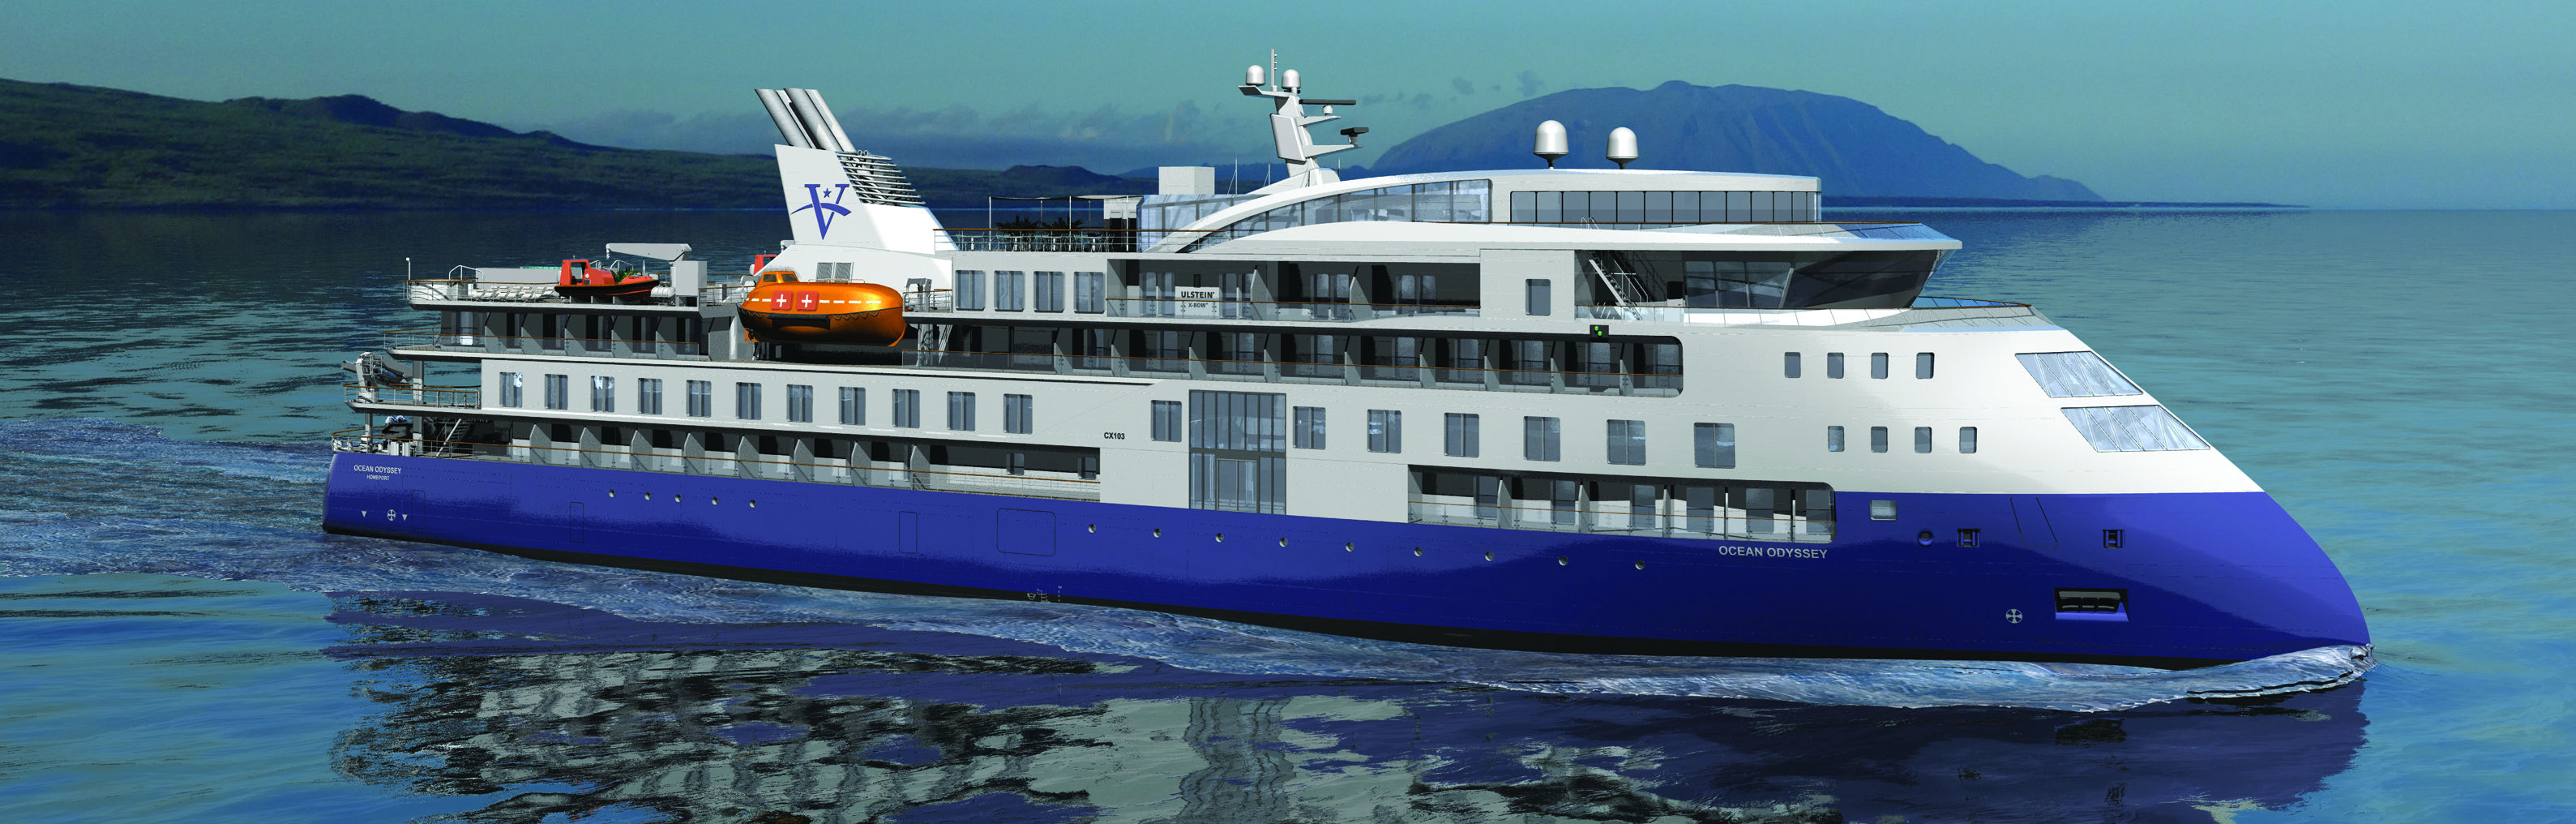 first-ever small ocean cruising vesselOcean Explorer on the sea